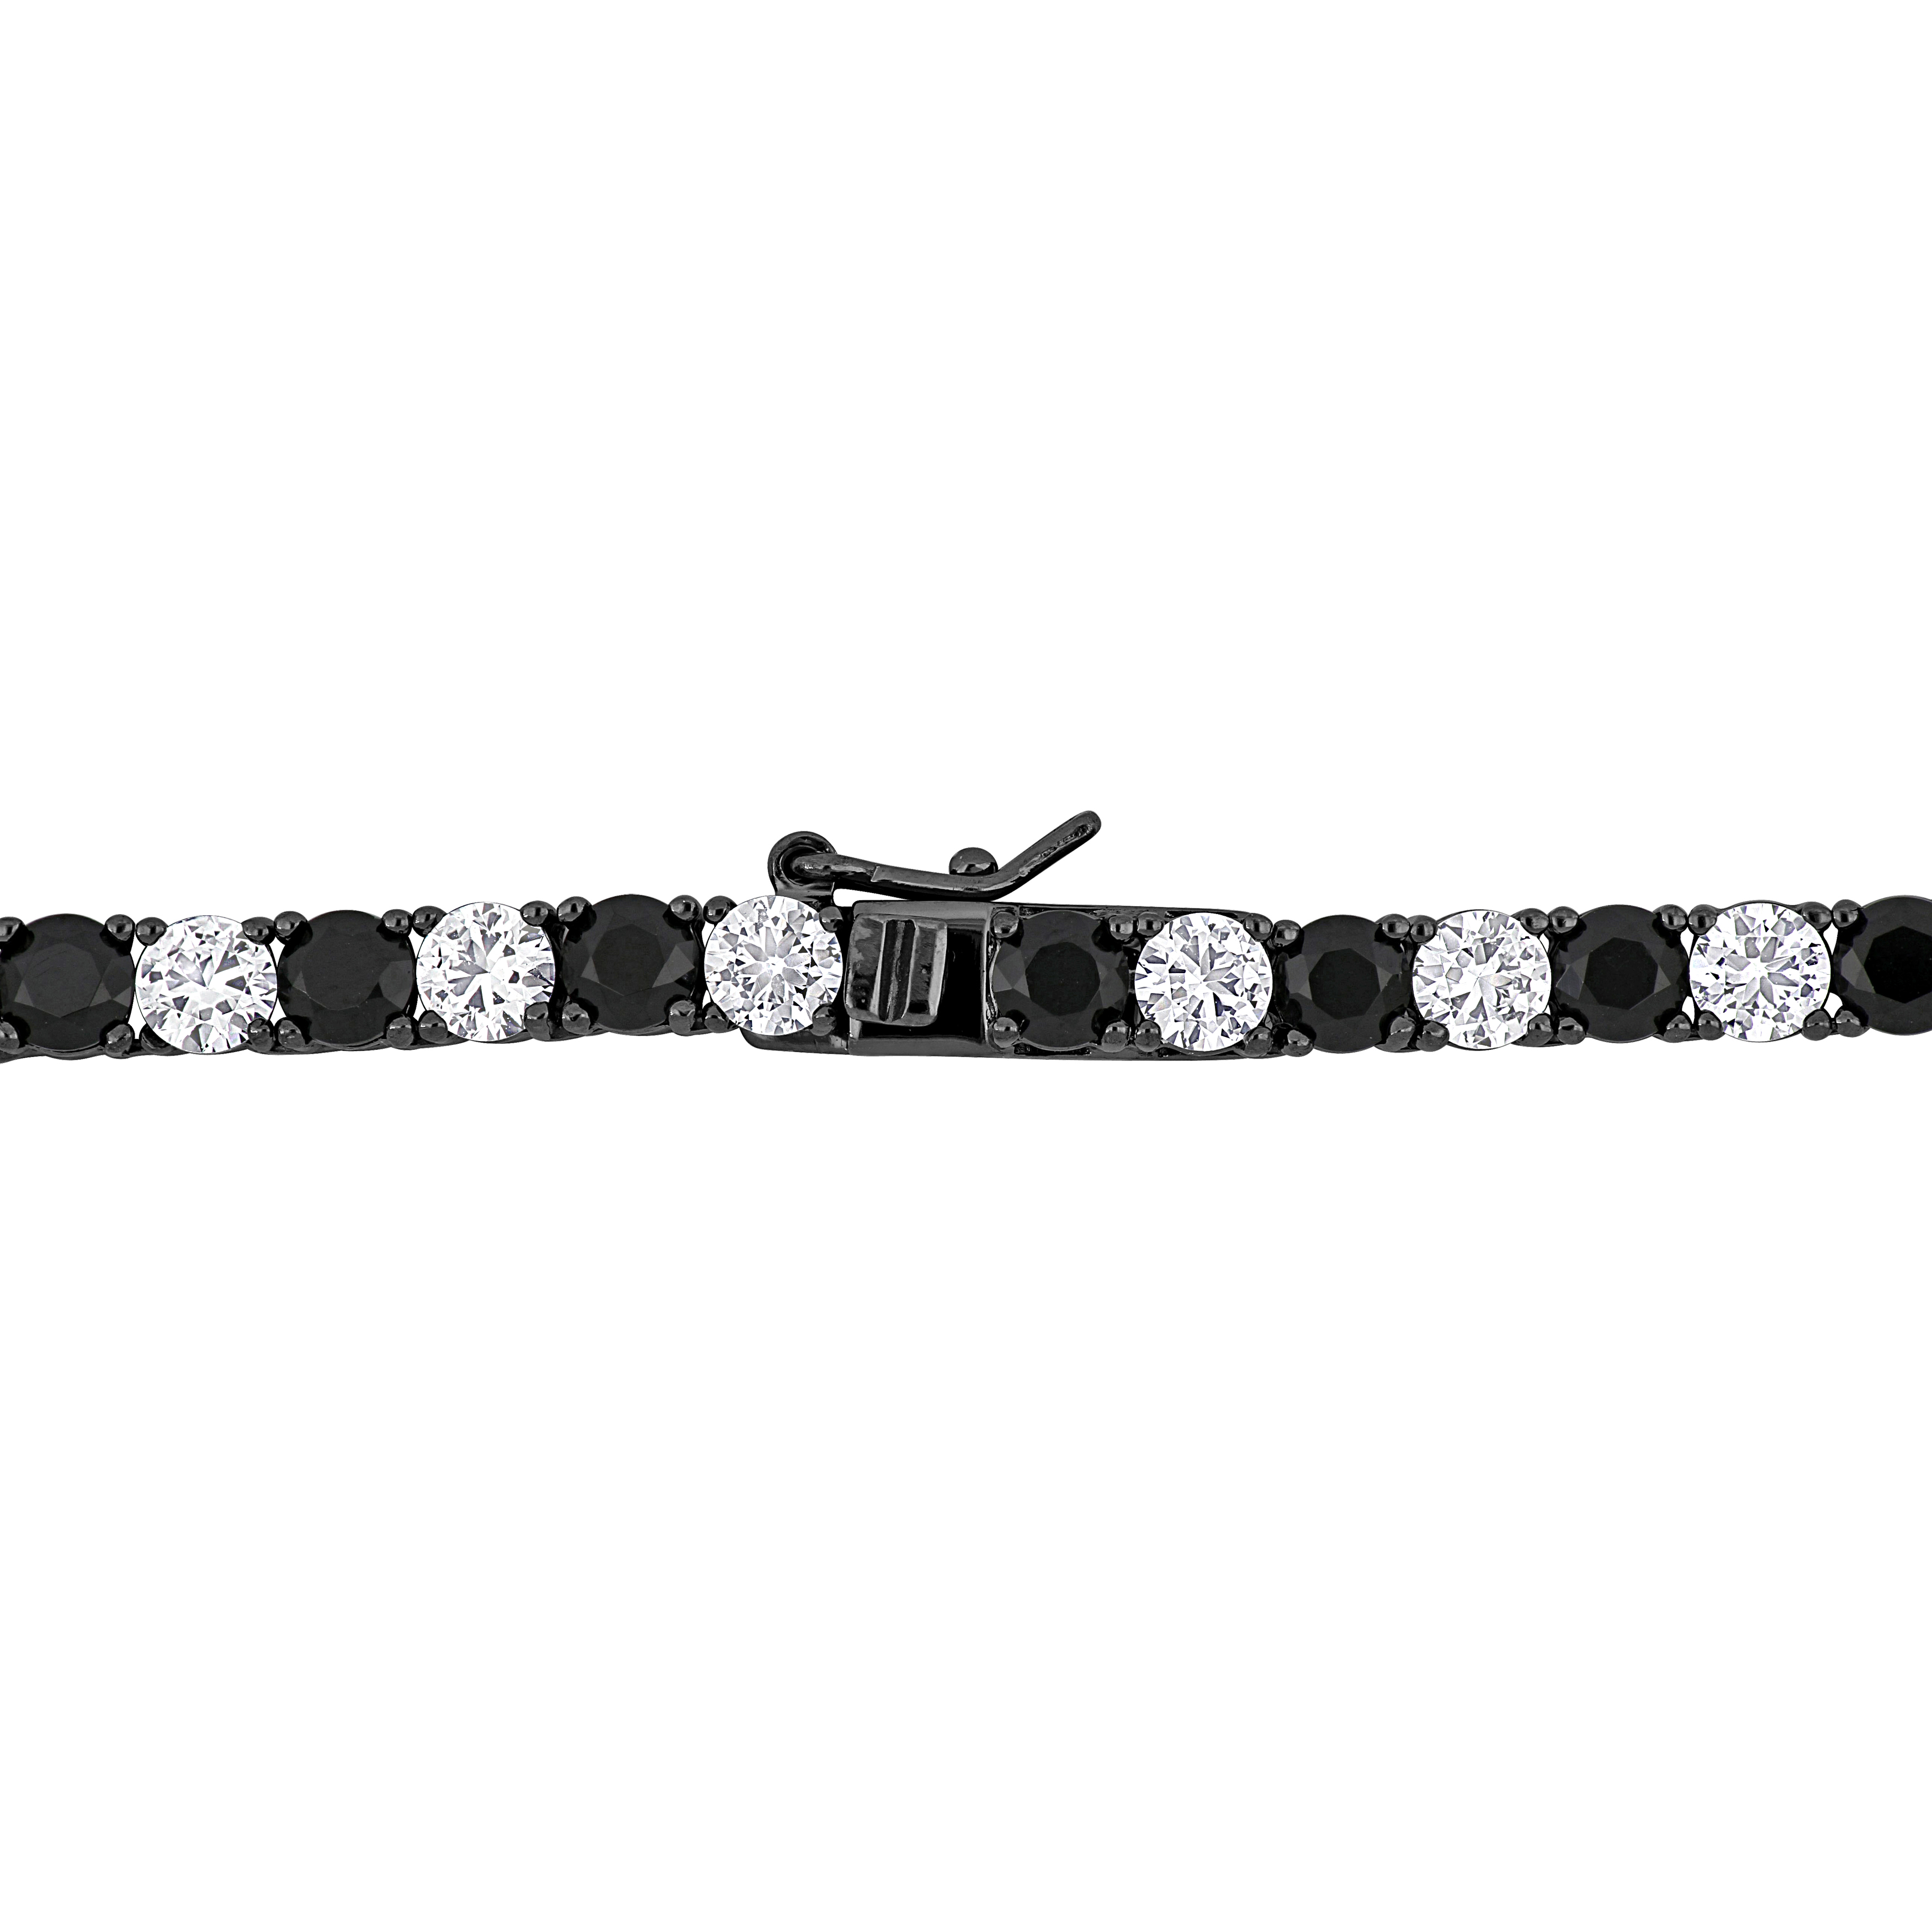 40 CT TGW Created Black and White Sapphire Classic Tennis Men's Necklace in Black Rhodium Plated Sterling Silver - 20 in.